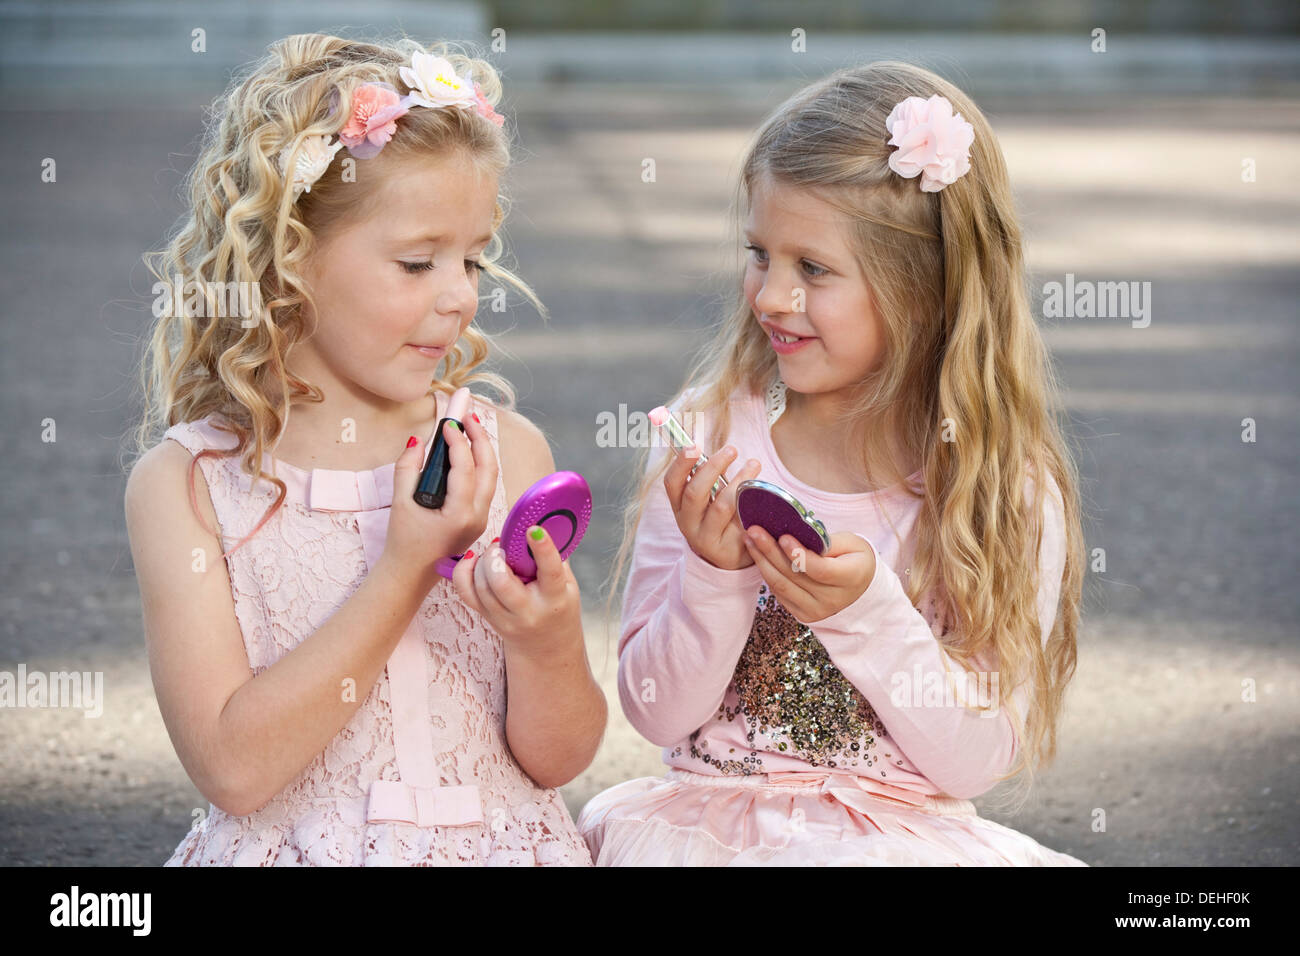 Two young preteen girls wearing pink and putting make up on. Stock Photo